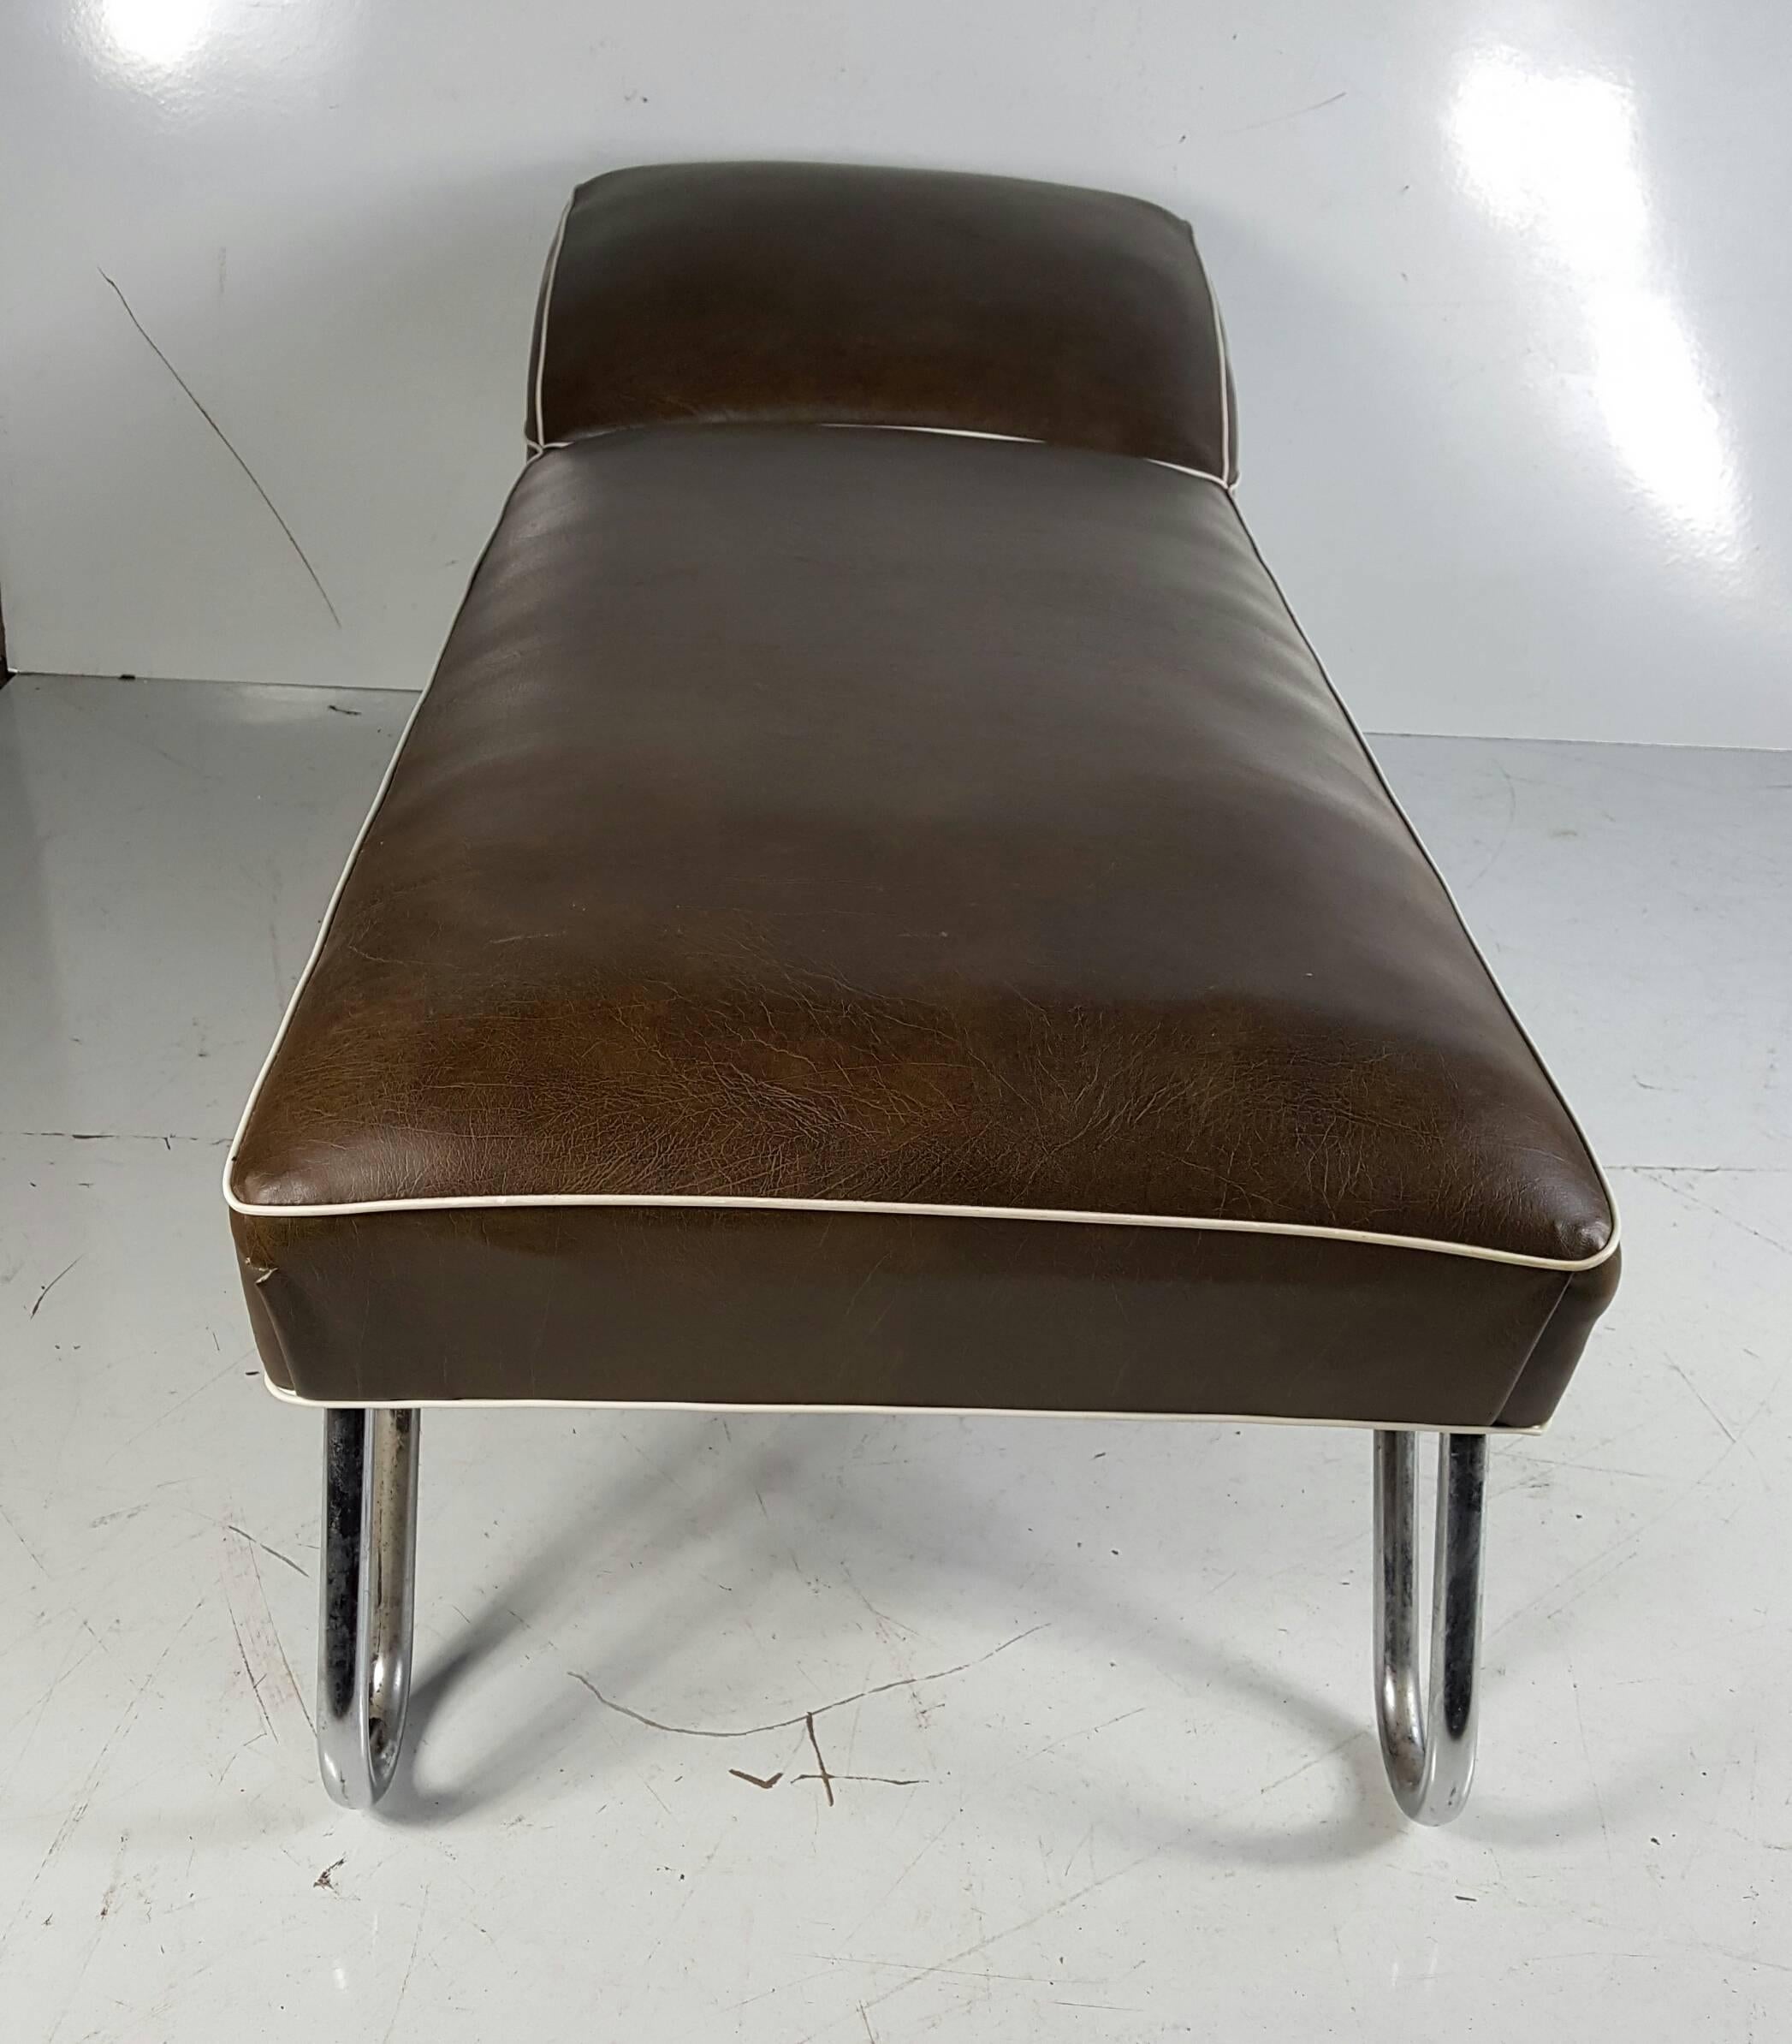 American KEM Weber Daybed or Chaise Longue, Art Deco